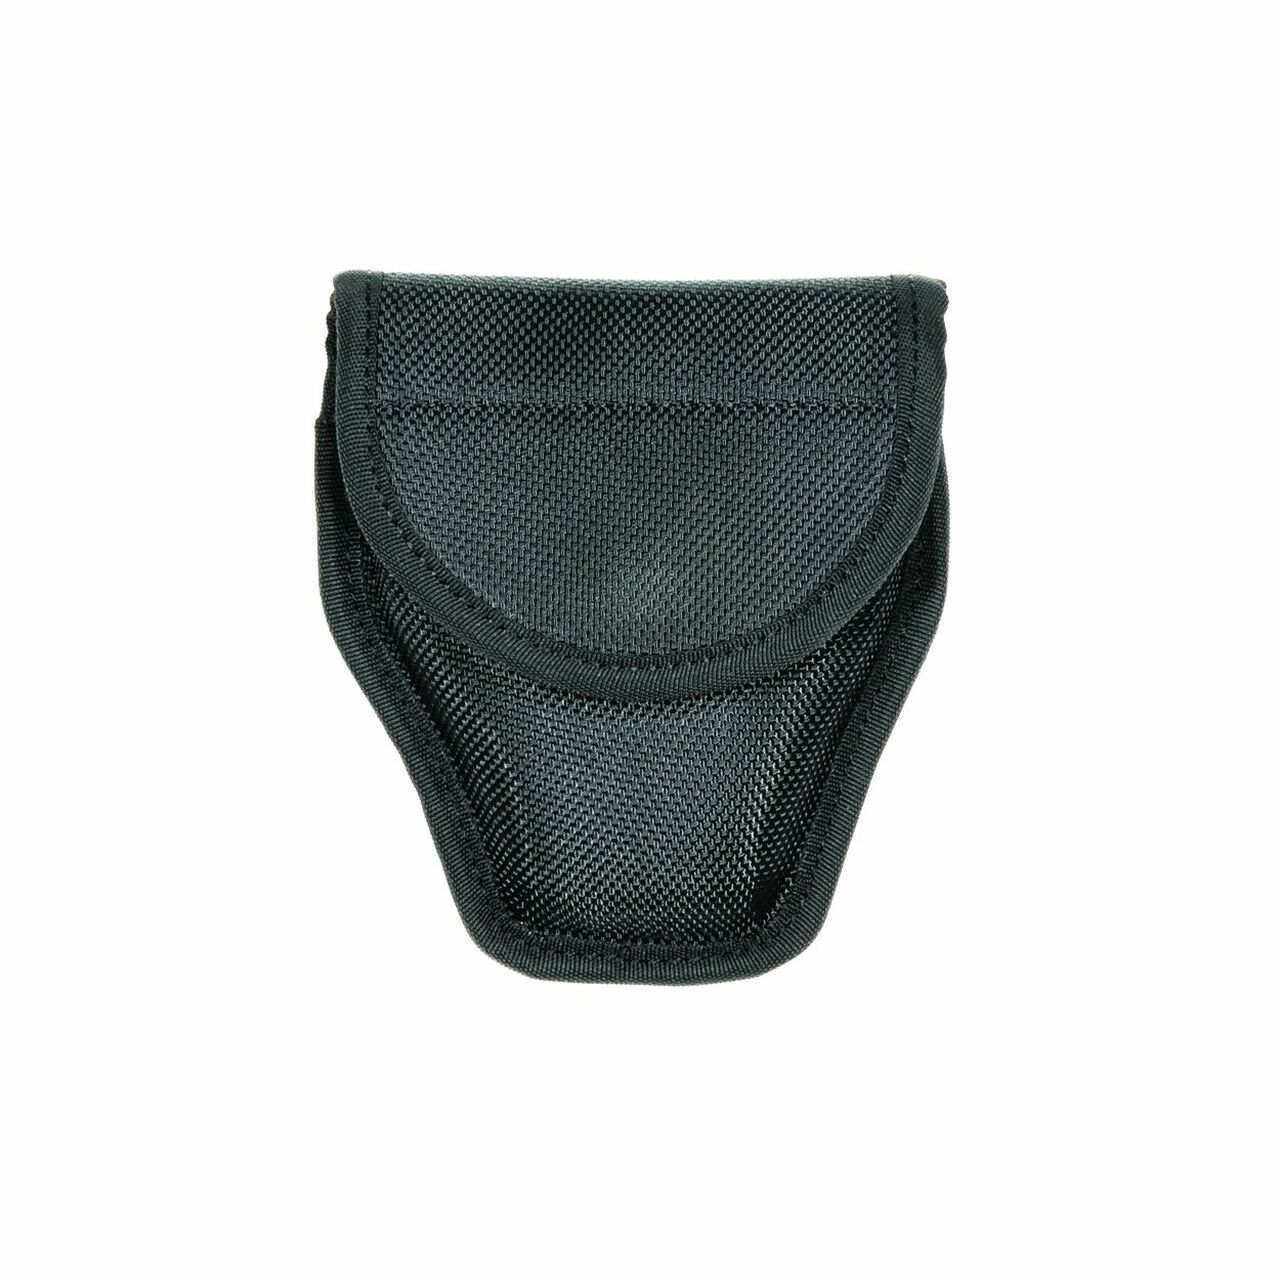 Ballistic Handcuff Case Open/Closed (Fits up to 2.25" Belt)